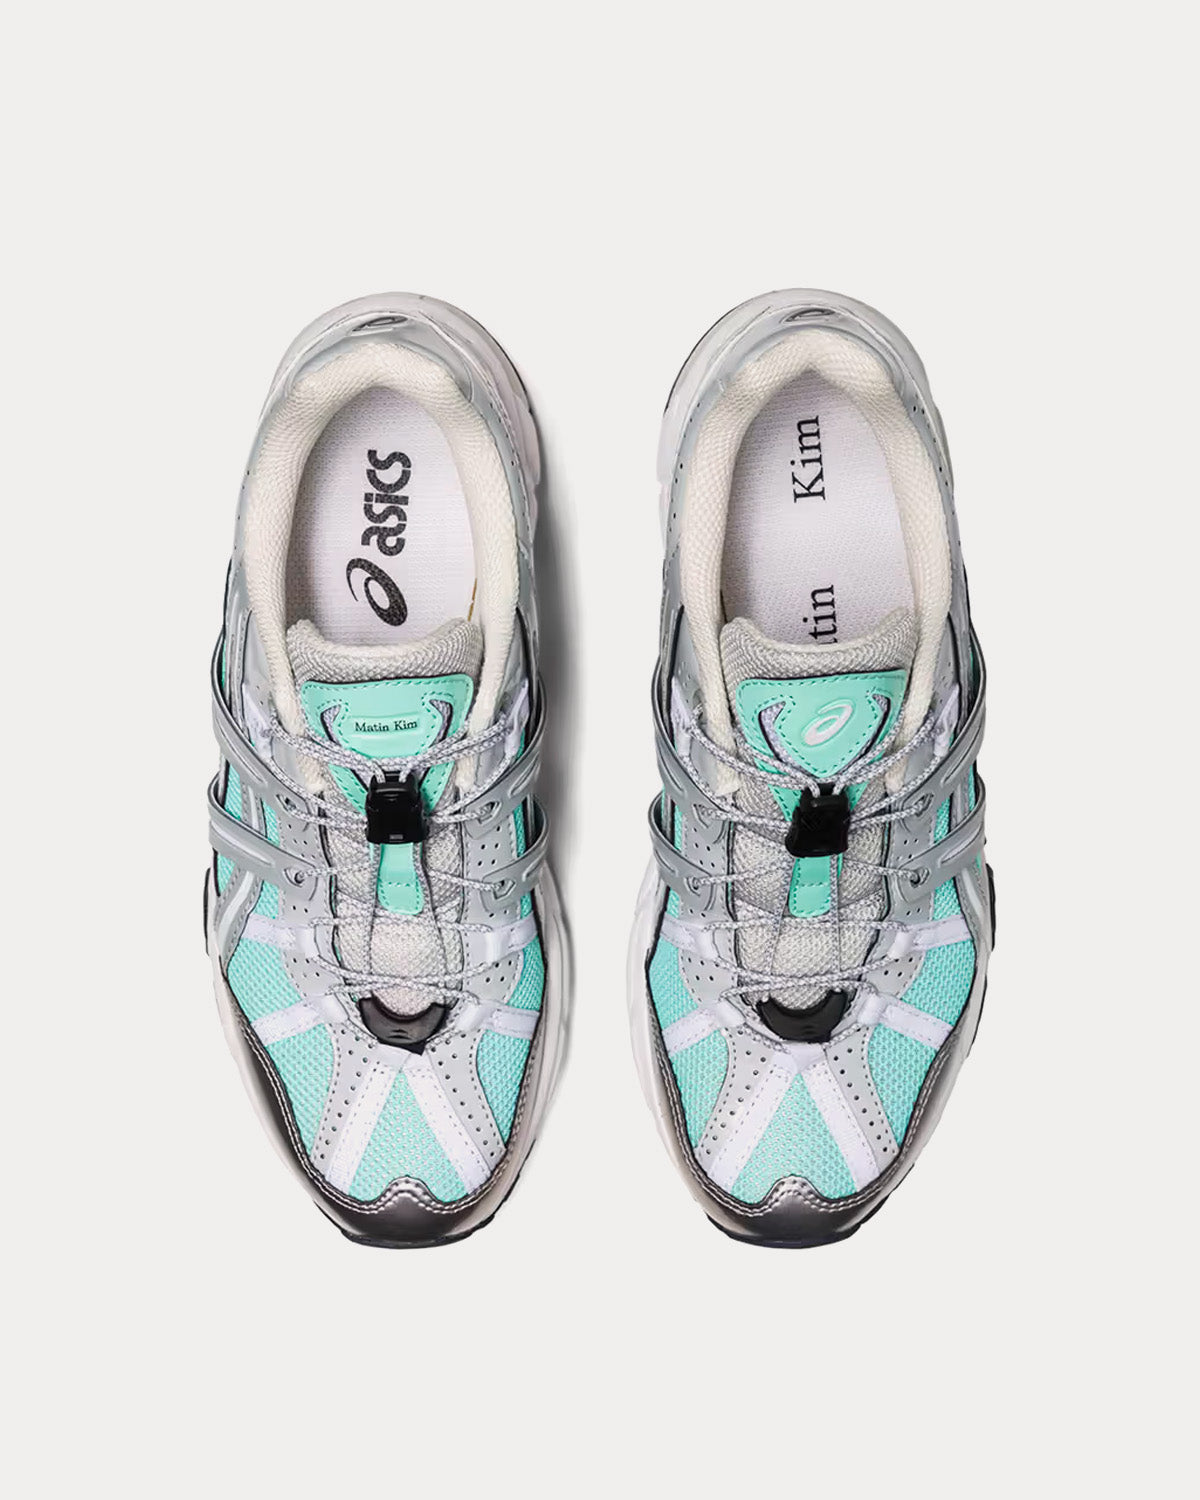 Asics x Matin Kim - Gel-Sonoma 15-50 'Tracing Ego' Silver Low Top Sneakers